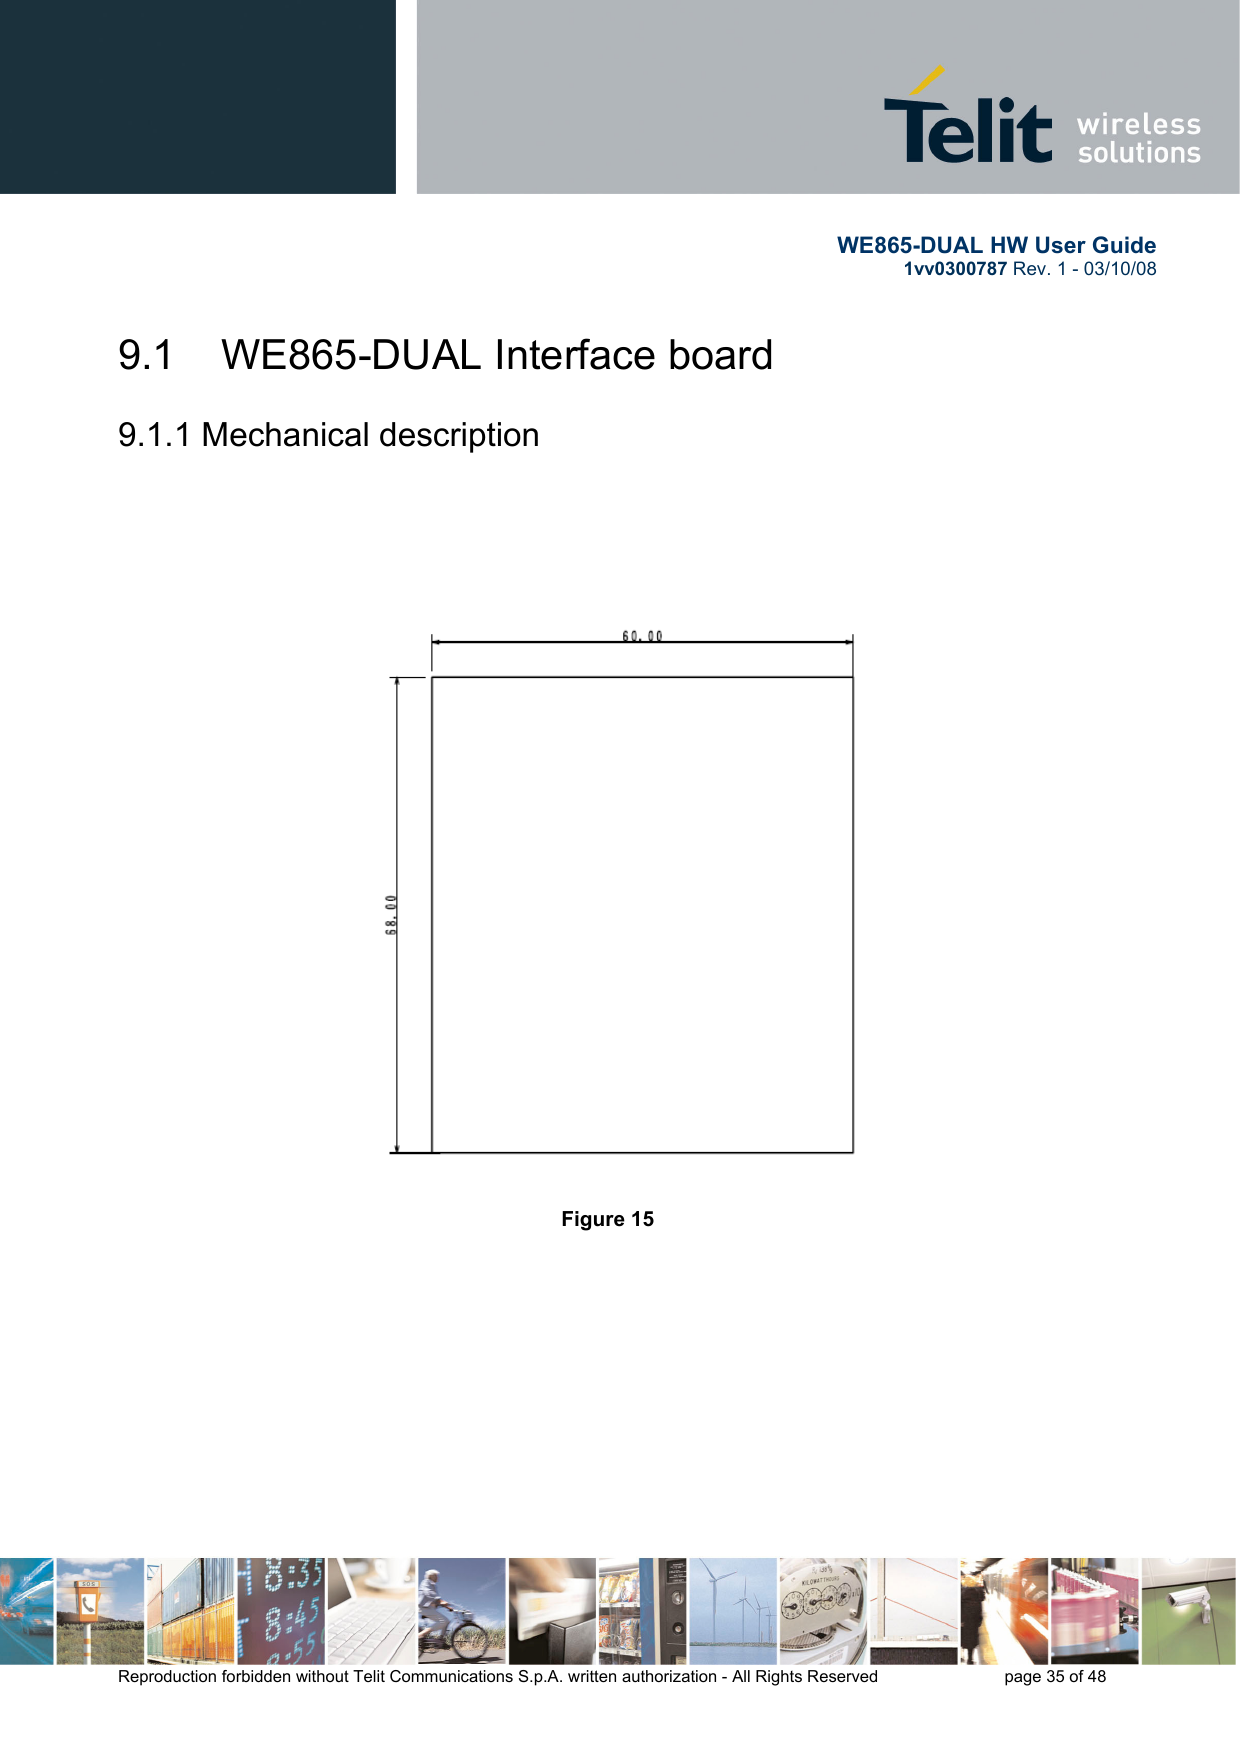       WE865-DUAL HW User Guide 1vv0300787 Rev. 1 - 03/10/08      Reproduction forbidden without Telit Communications S.p.A. written authorization - All Rights Reserved    page 35 of 48  9.1  WE865-DUAL Interface board  9.1.1 Mechanical description                                Figure 15                    